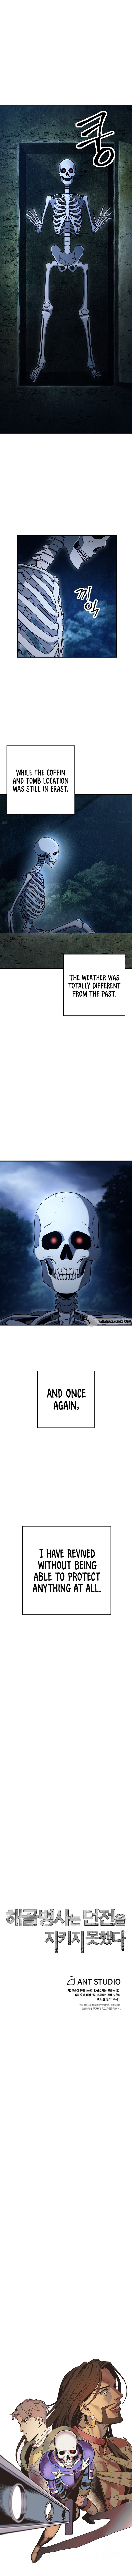 The Skeleton Soldier Failed to Defend the Dungeon [Official] chapter 200